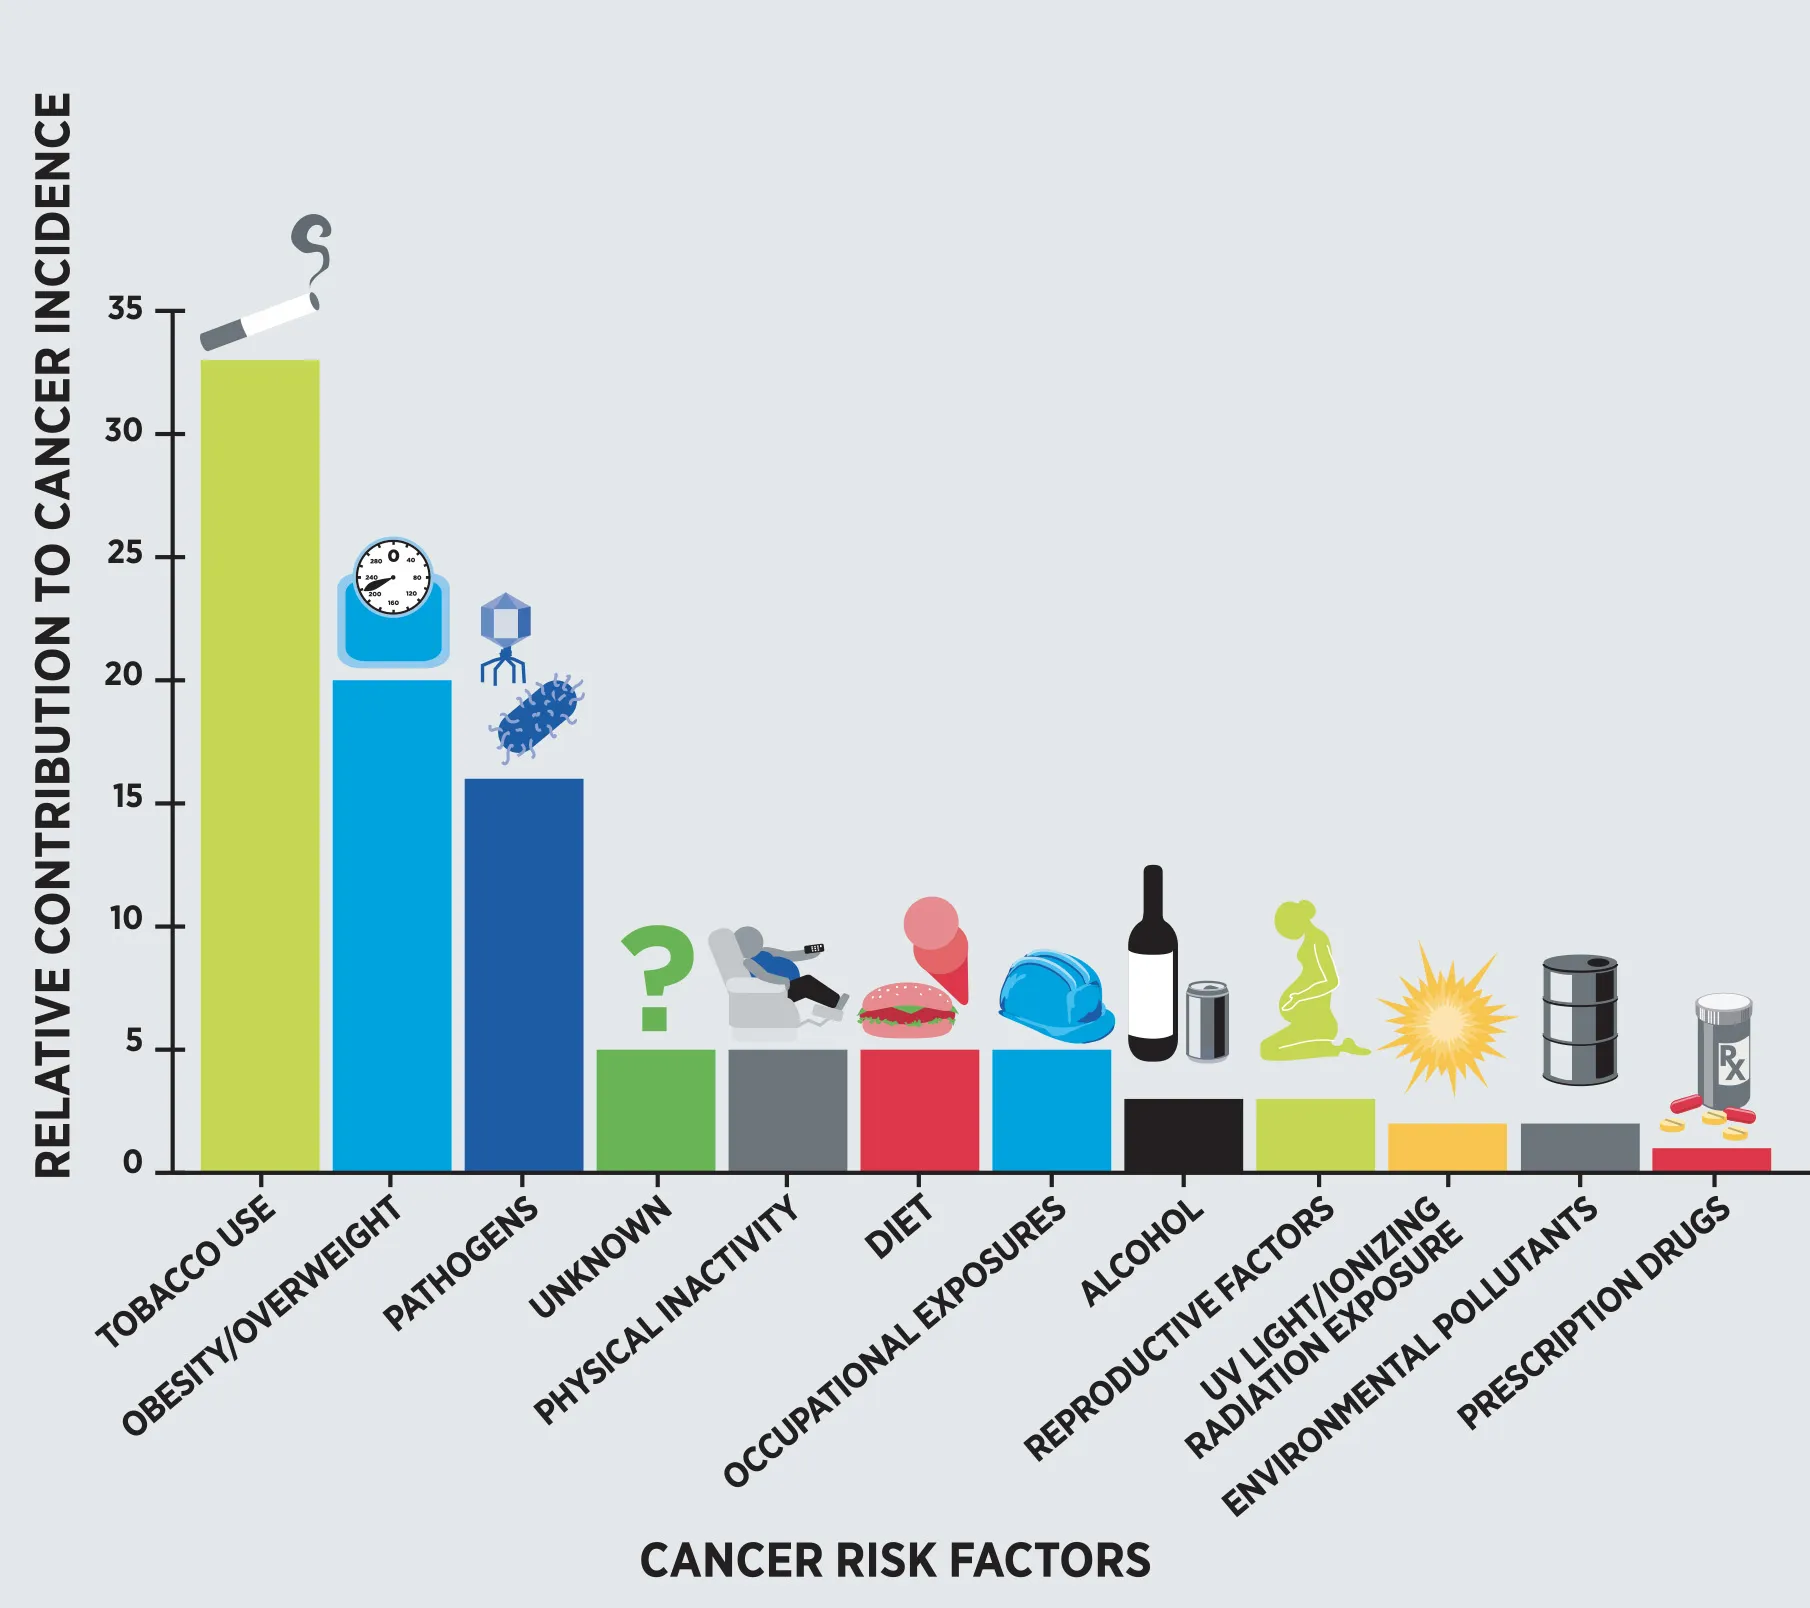 Figure 1. Besides various other risk factors, alcohol’s contribution to overall cancer incidence is estimated at approximately 3% (Arteaga et al. 2014)